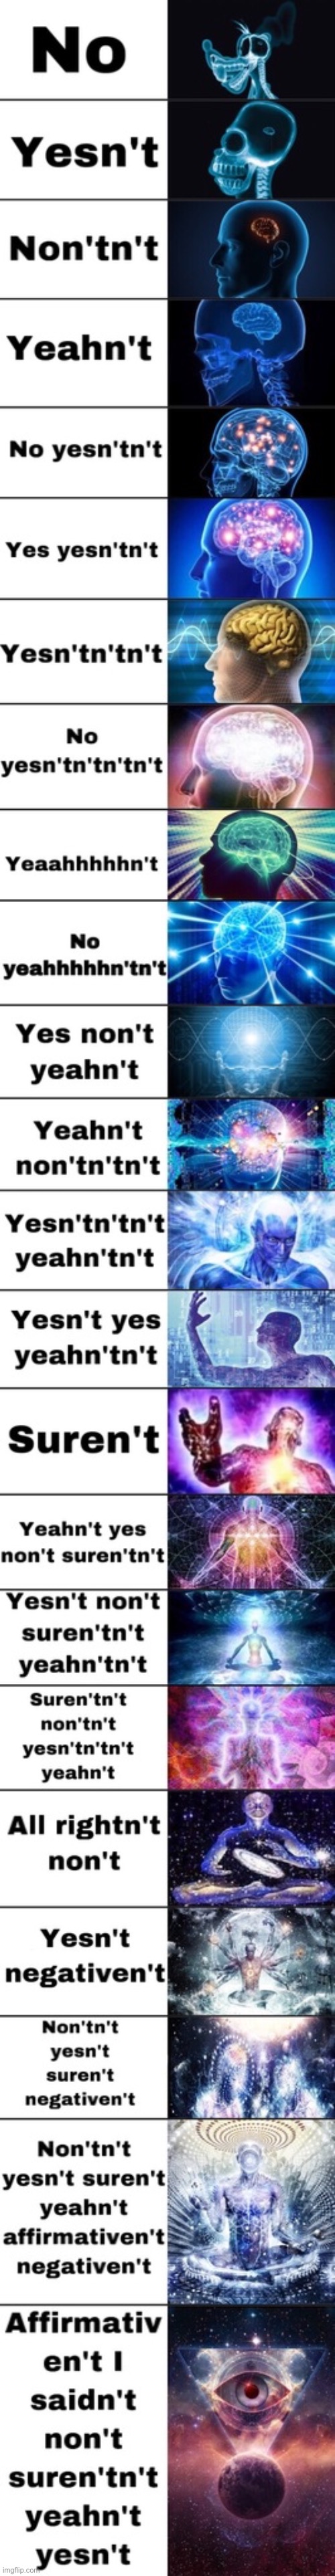 Yesn’t | image tagged in meme | made w/ Imgflip meme maker